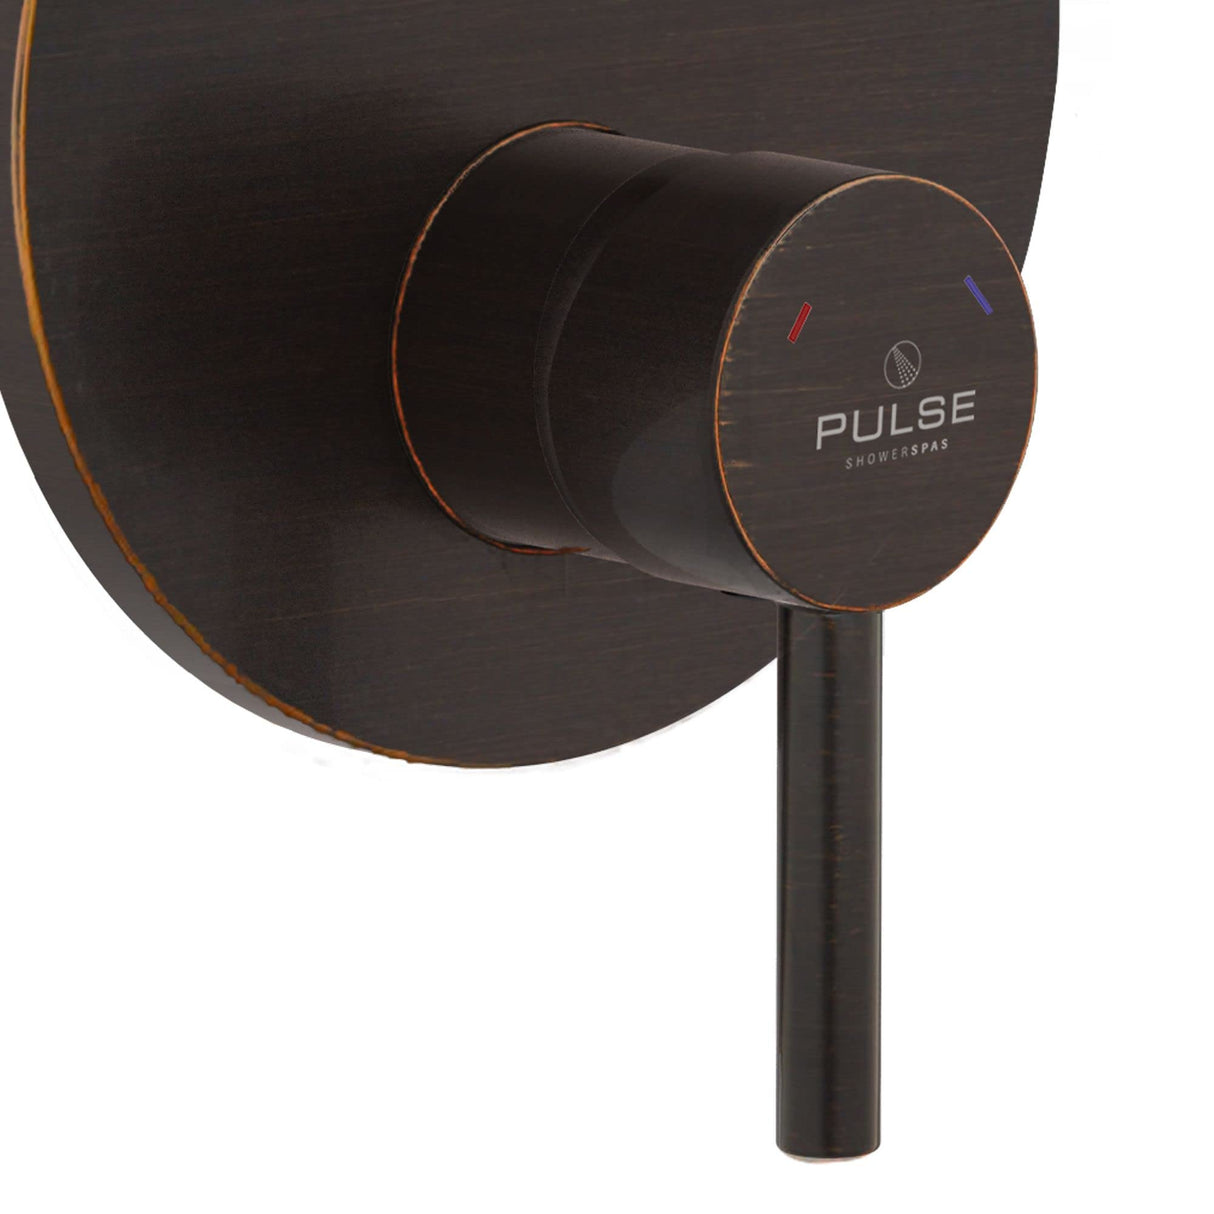 PULSE ShowerSpas 3005-RIVD-ORB Two Way Tru-Temp Pressure Balance 1/2" Rough-In Valve with Oil-Rubbed Bronze Trim Kit